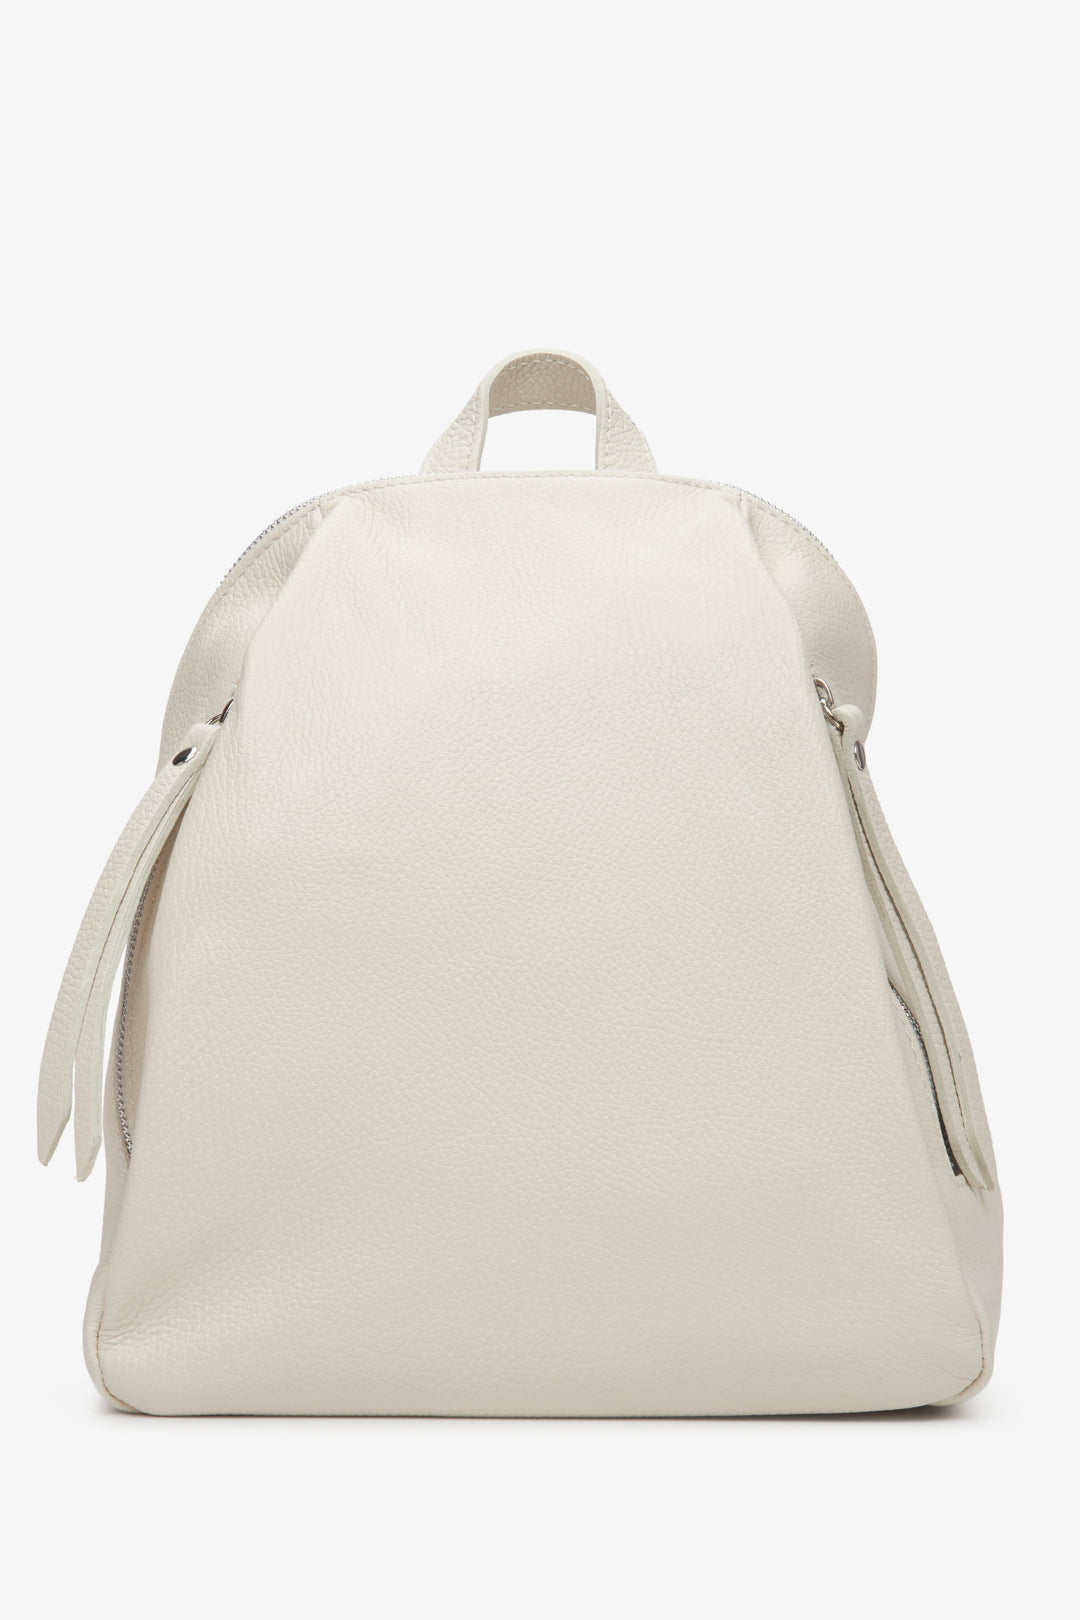 Women's light beige leather backpack with silver accents Estro - reverse.